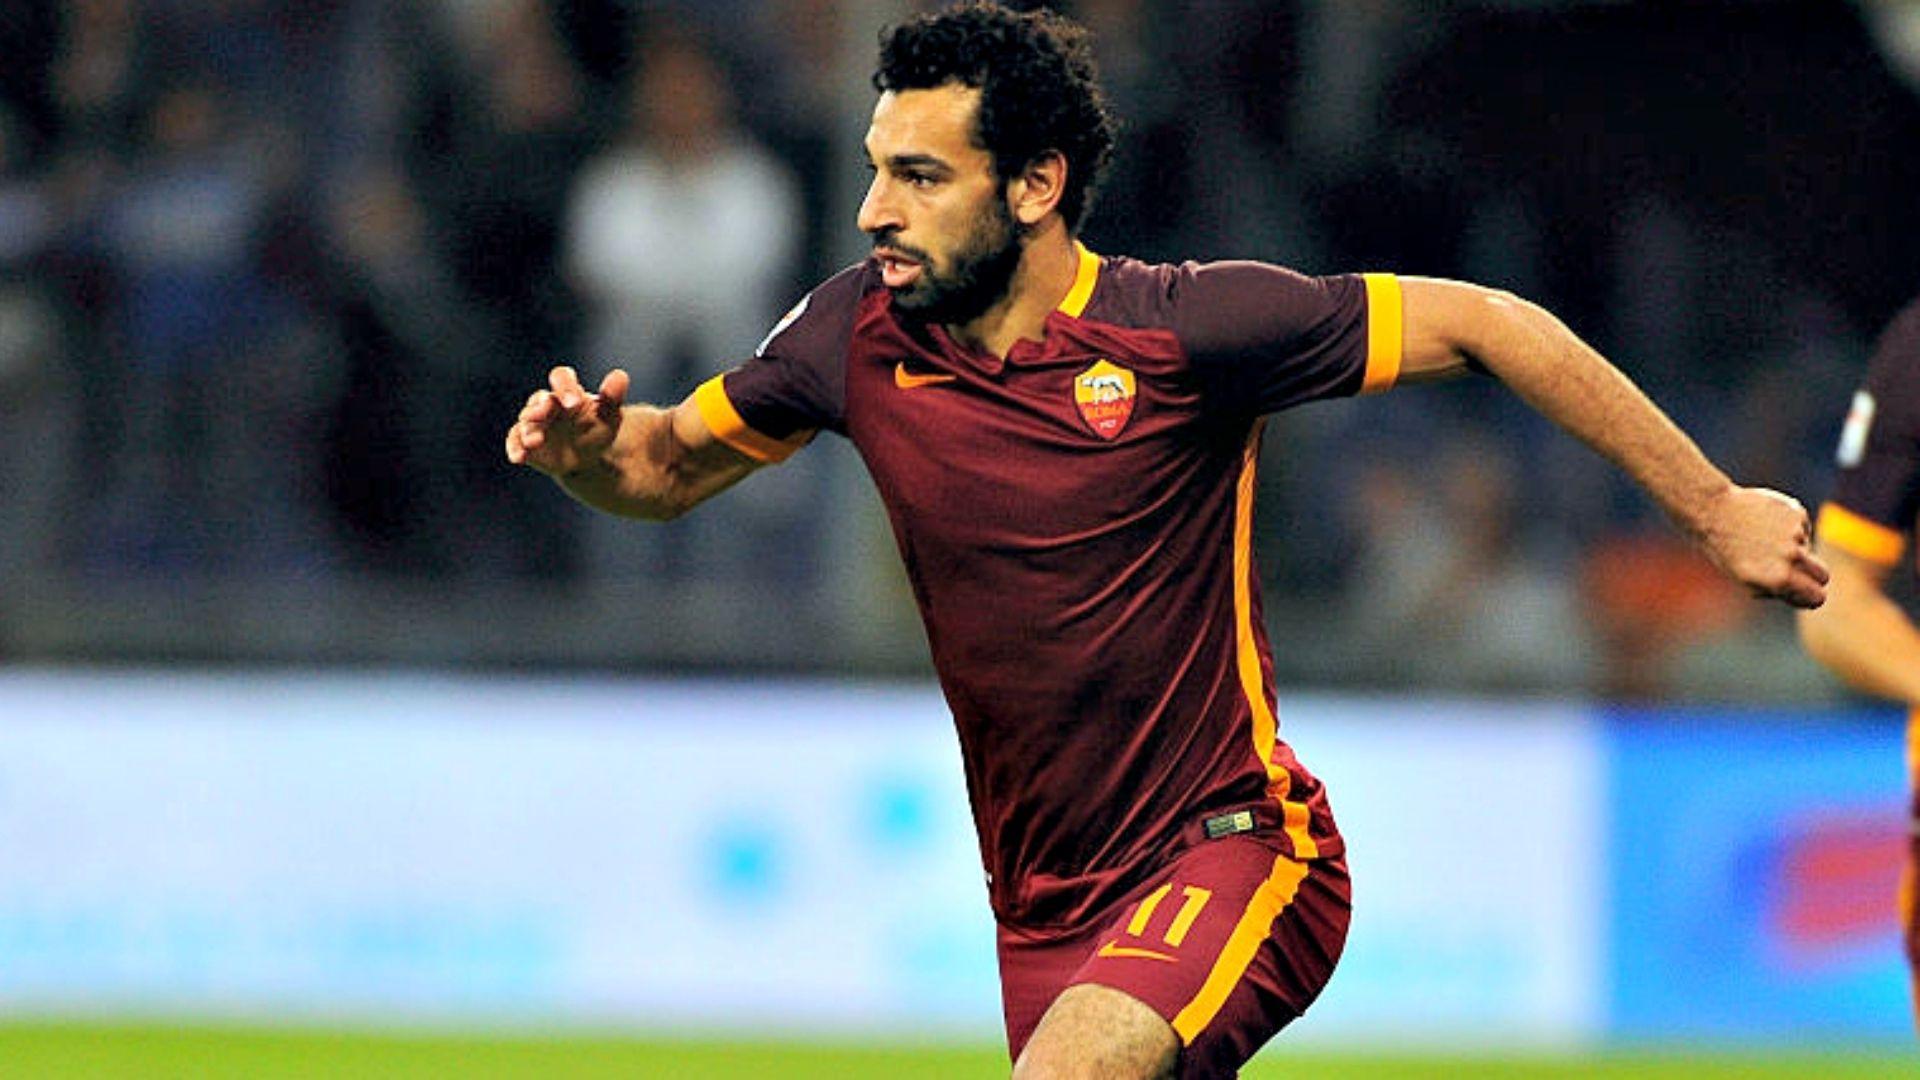 Best image about Mohamed salah ASR. Rome italy